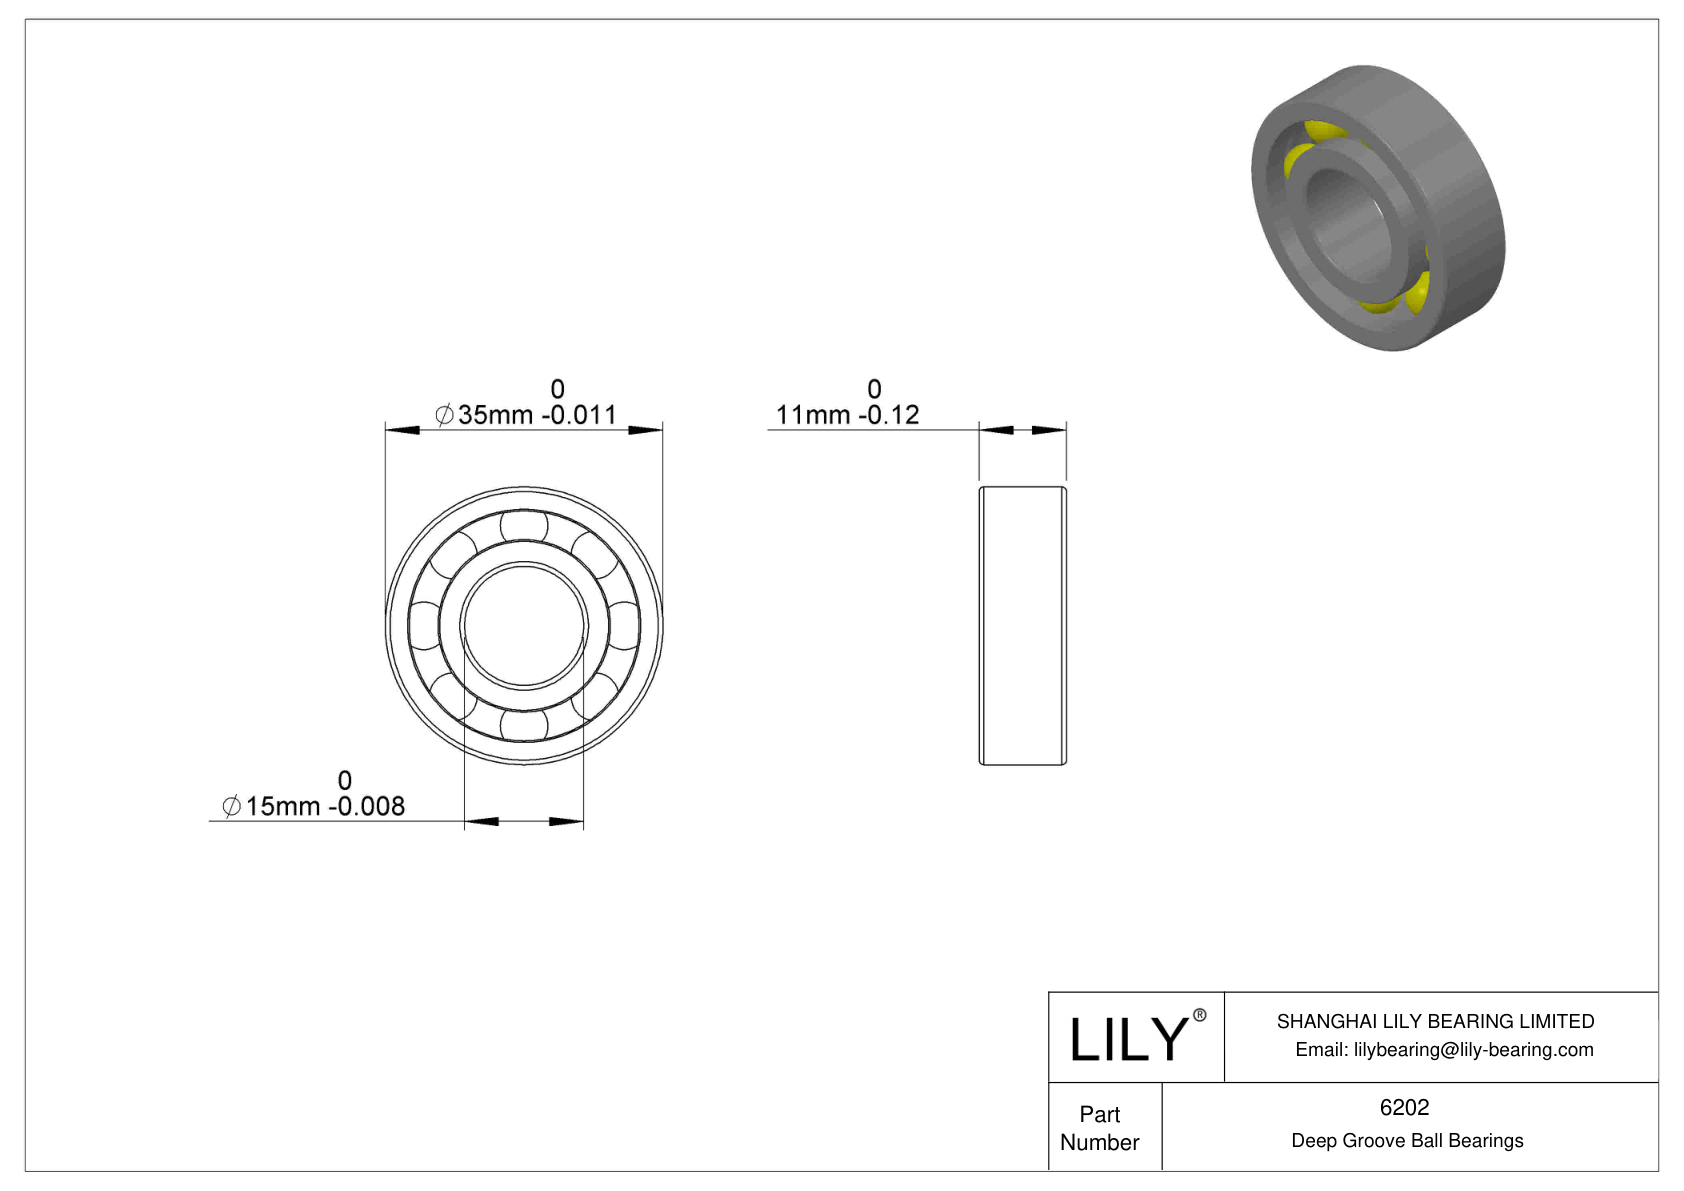 LILY-PU620248-15C2L12M10 Polyurethane Coated Bearing With Screw cad drawing